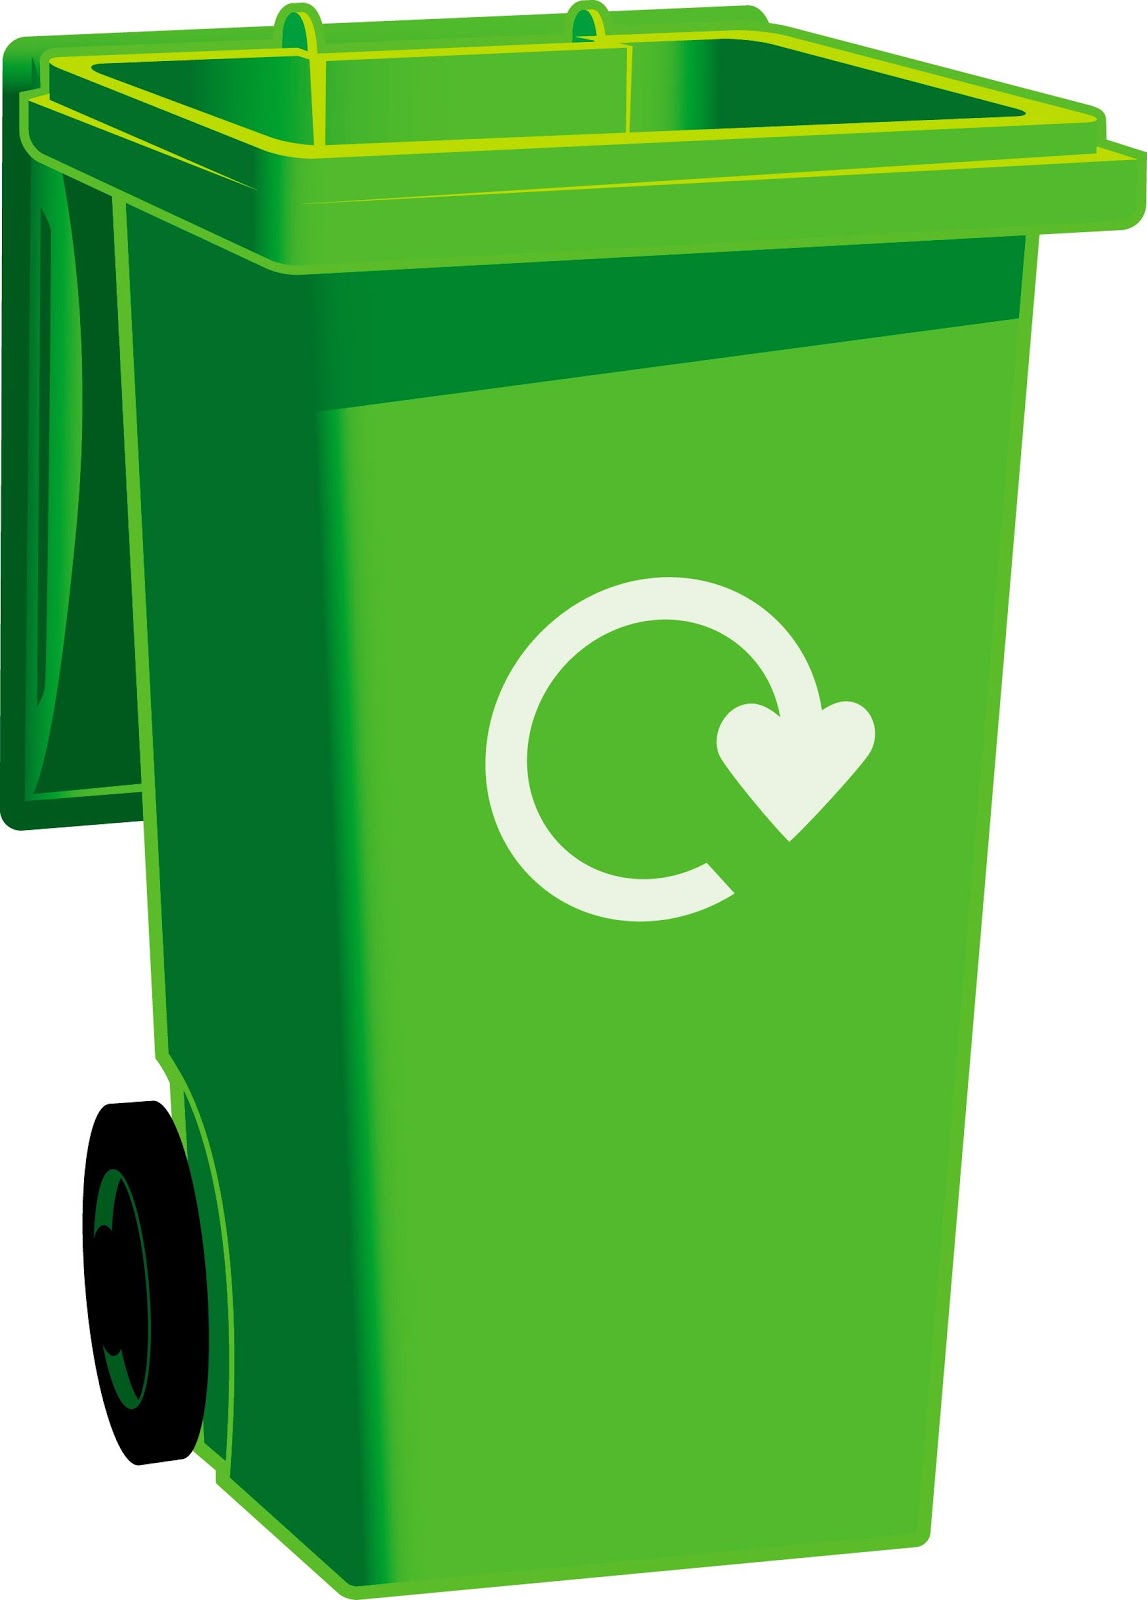 How Can Rename the Recycle Bin ~ Computer Software & Hardware ...